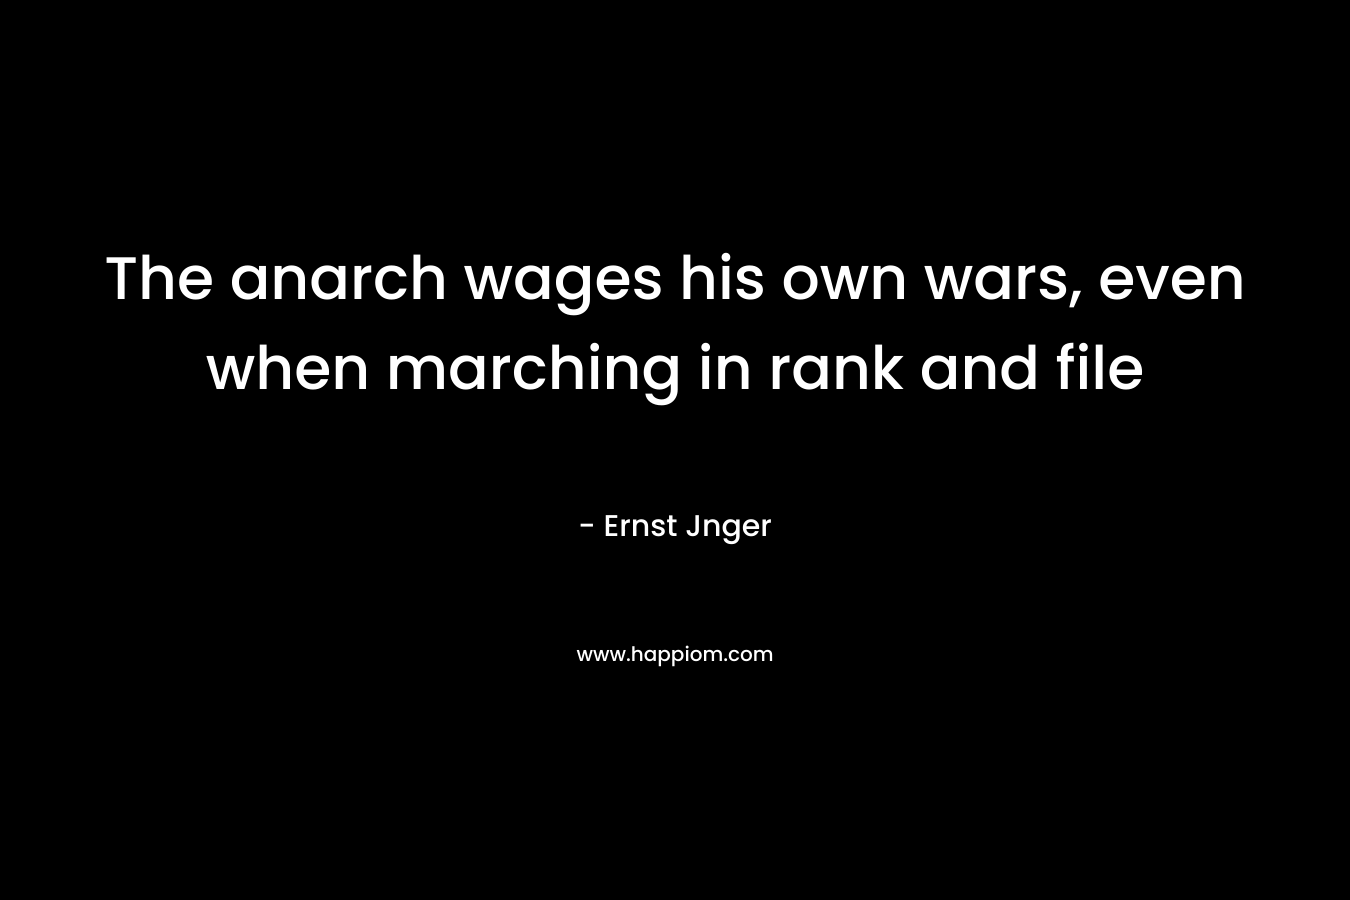 The anarch wages his own wars, even when marching in rank and file – Ernst Jnger